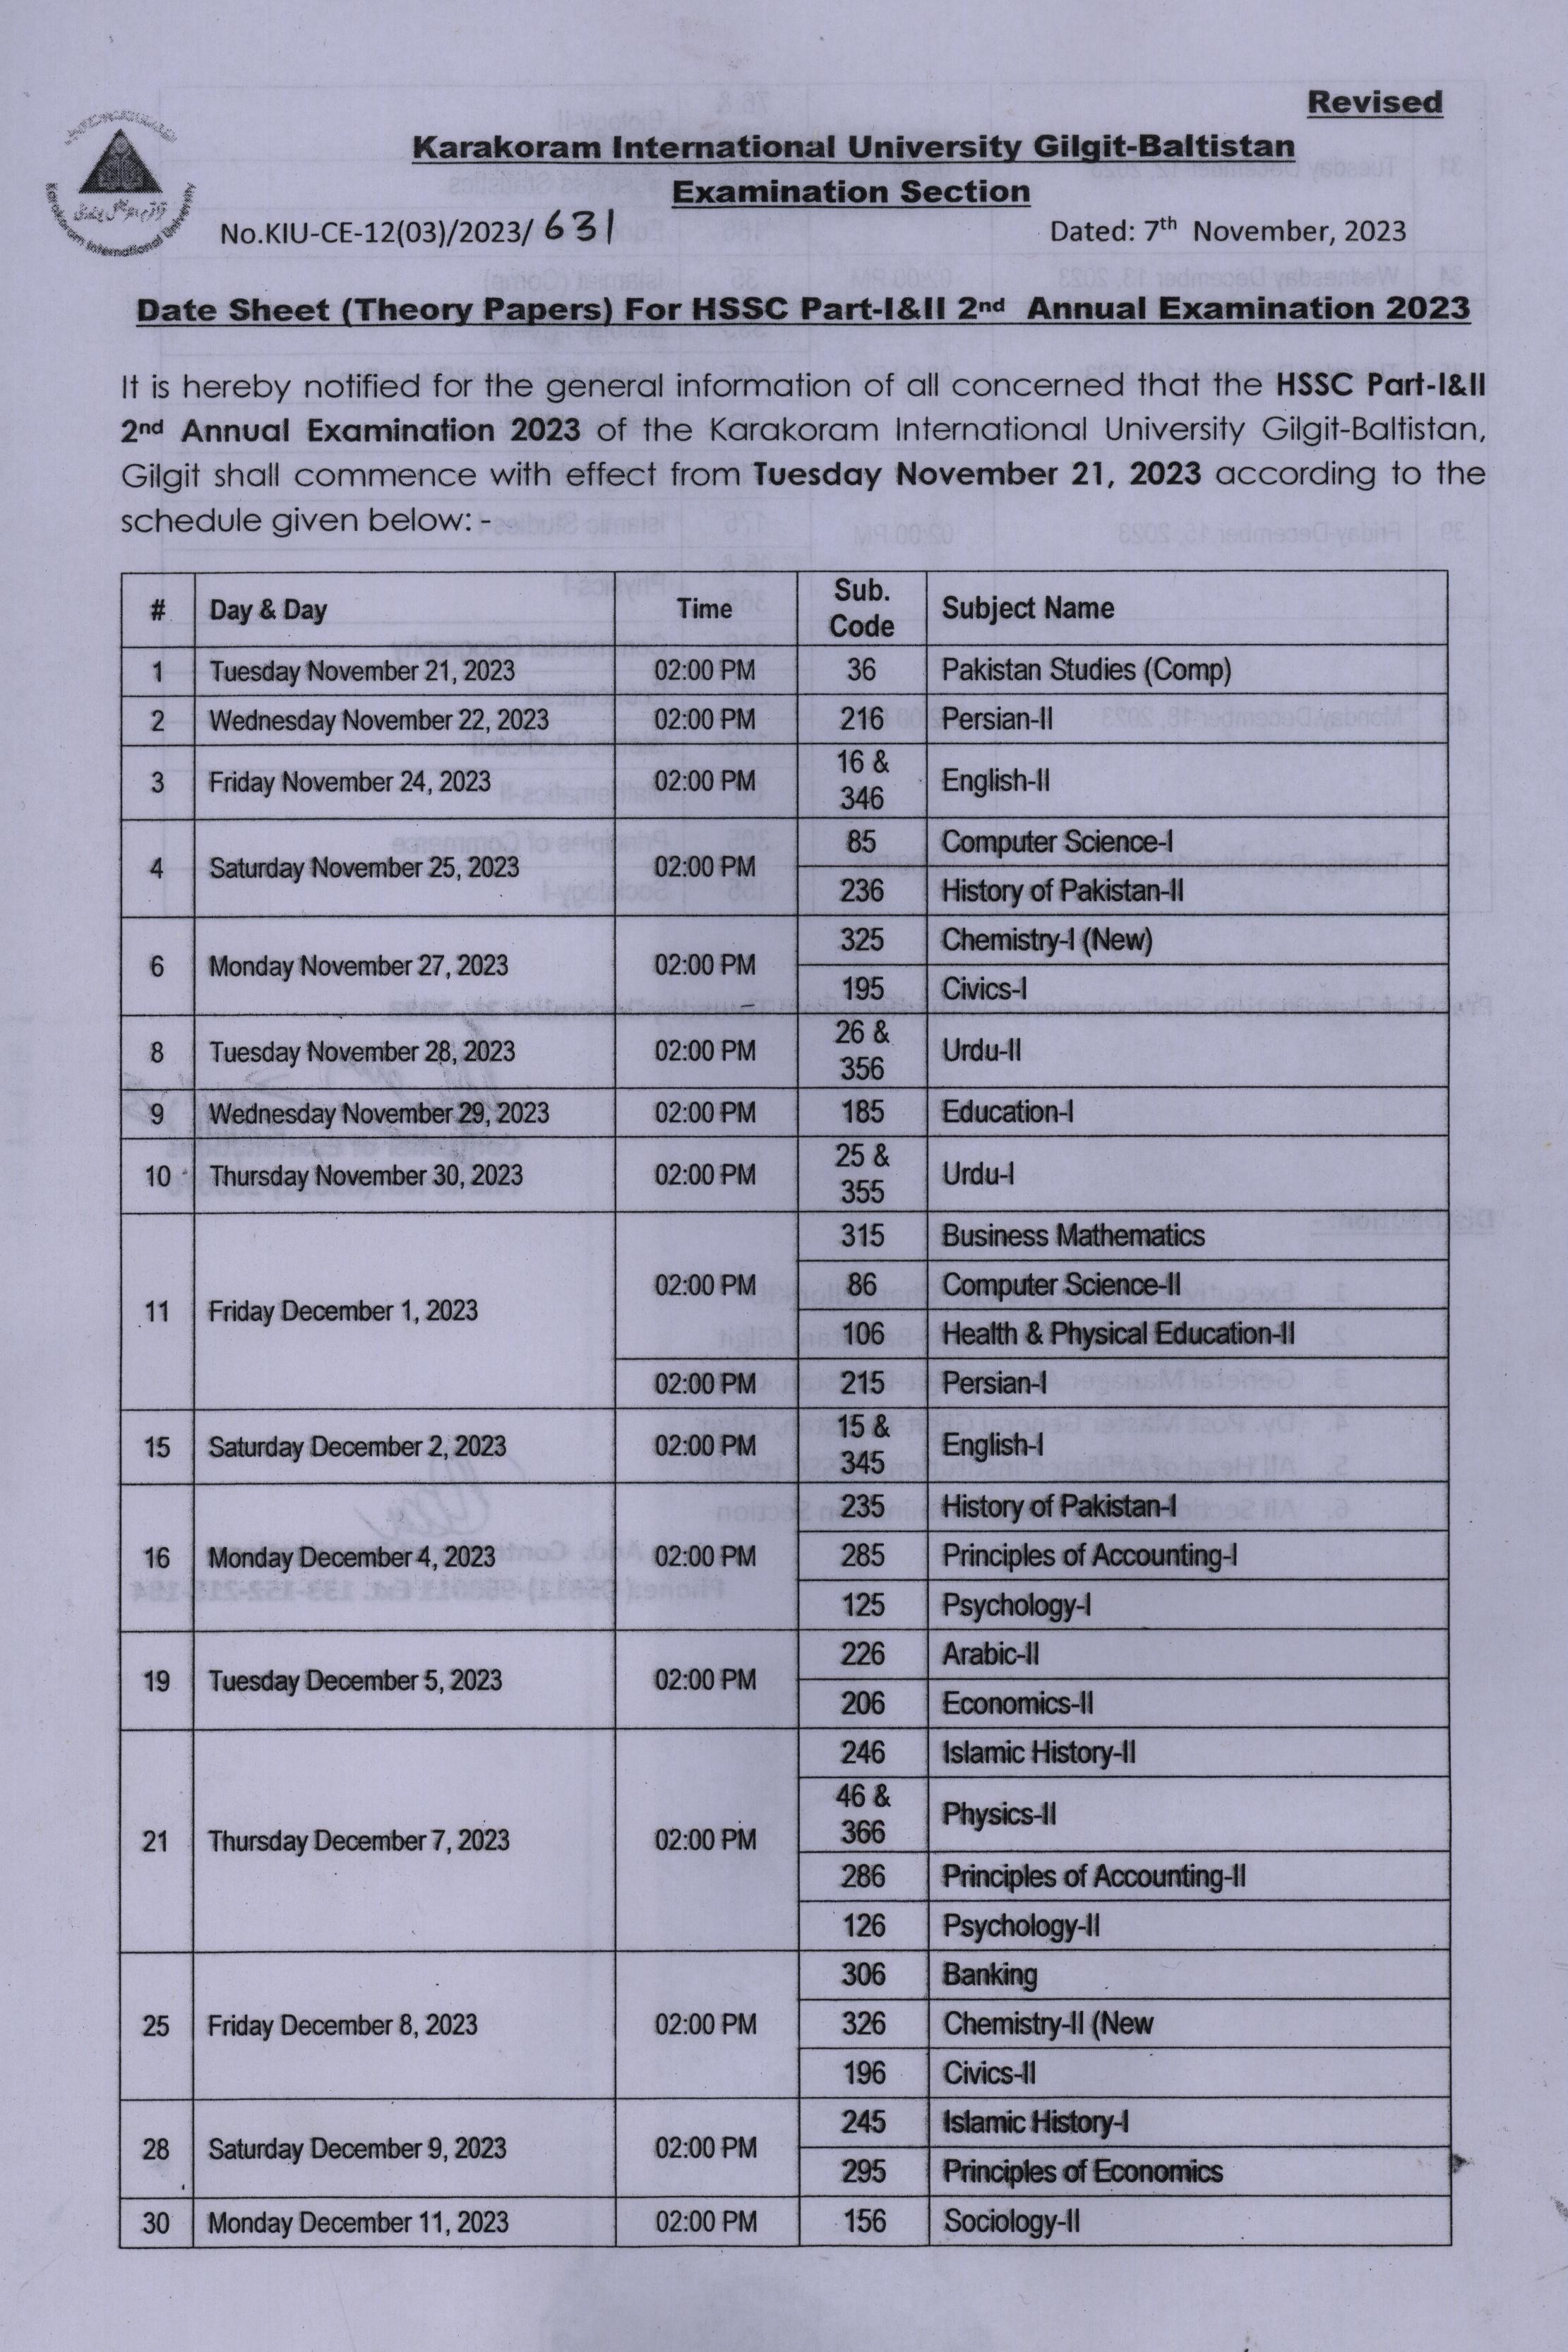 Date sheet for HSSC Part-I & II First Annual Examination 2023